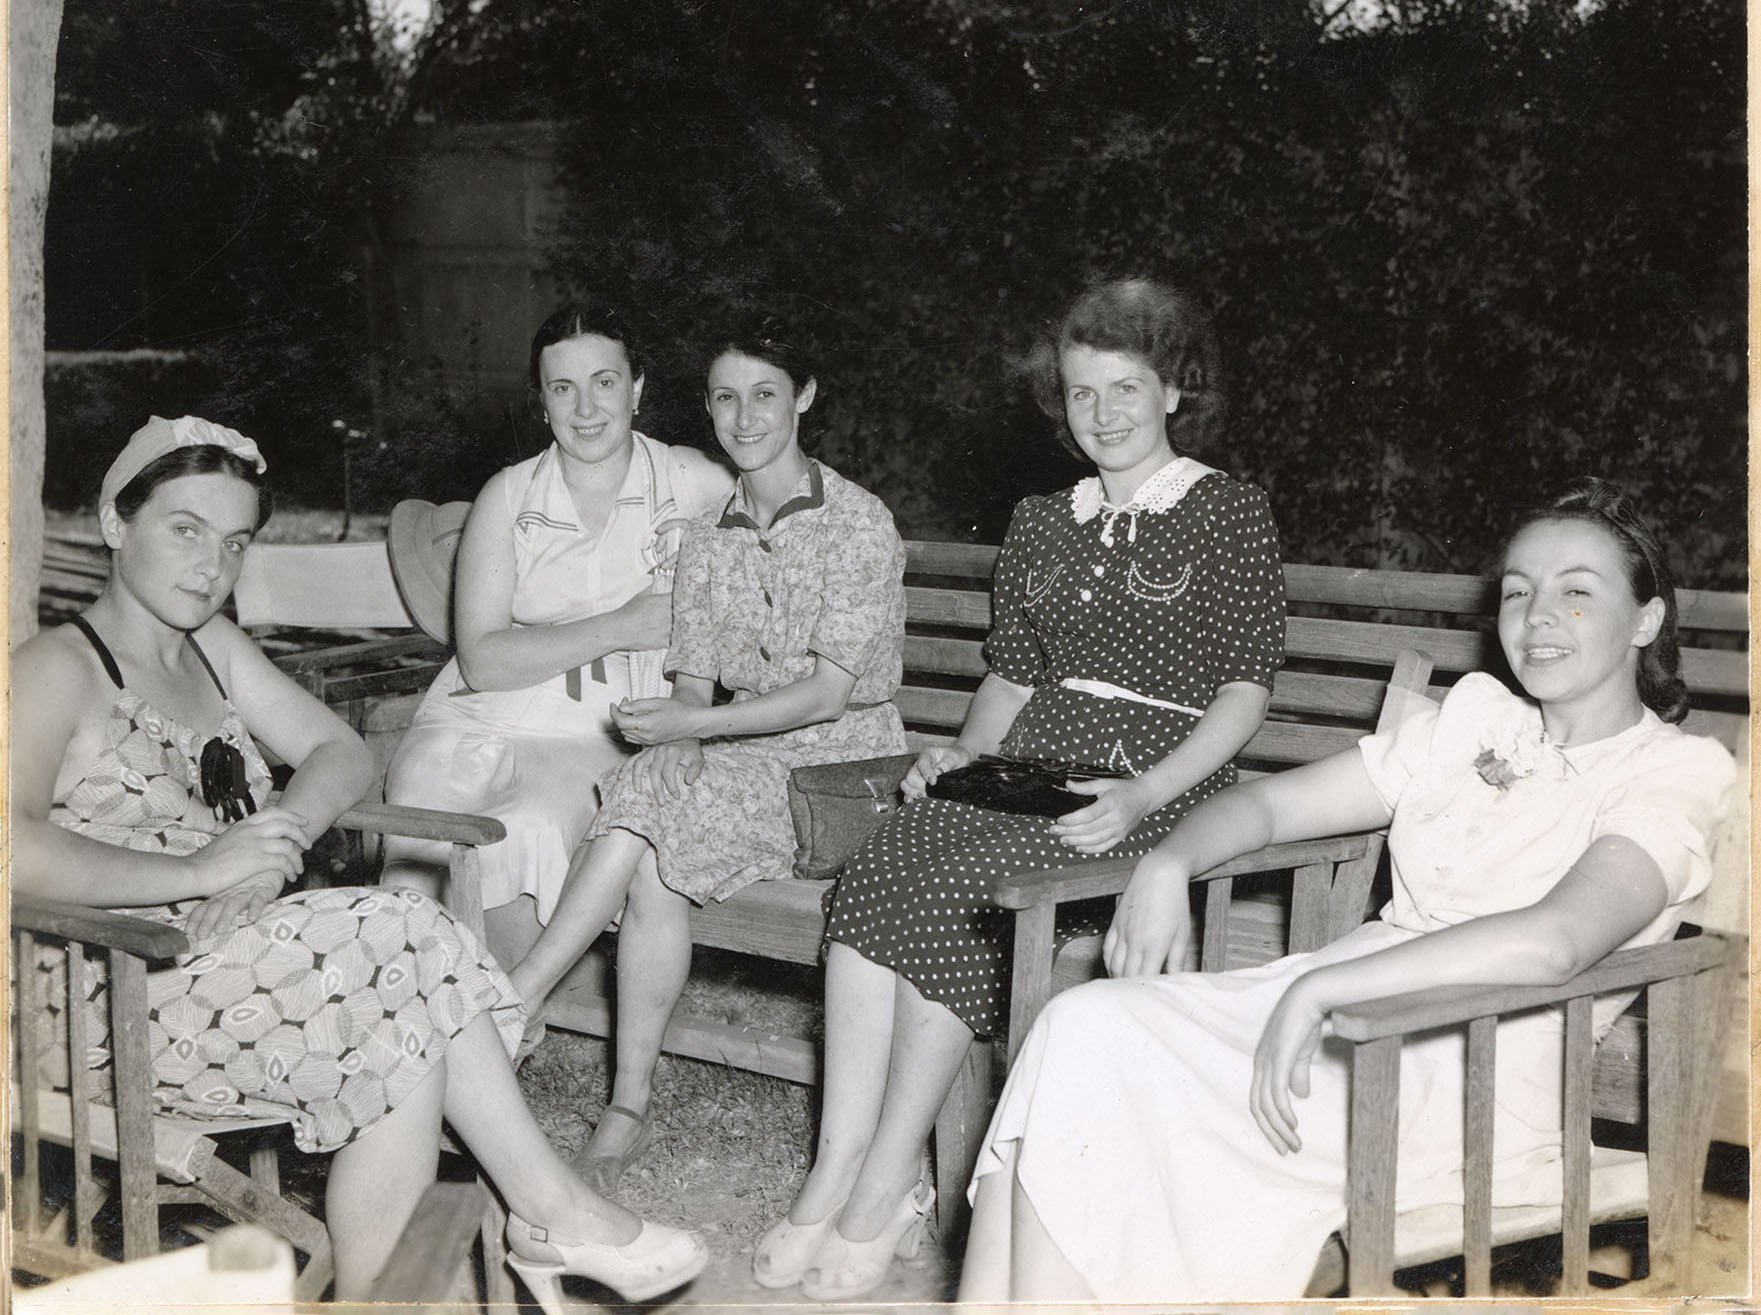 Five women sit outdoors on chairs and a bench